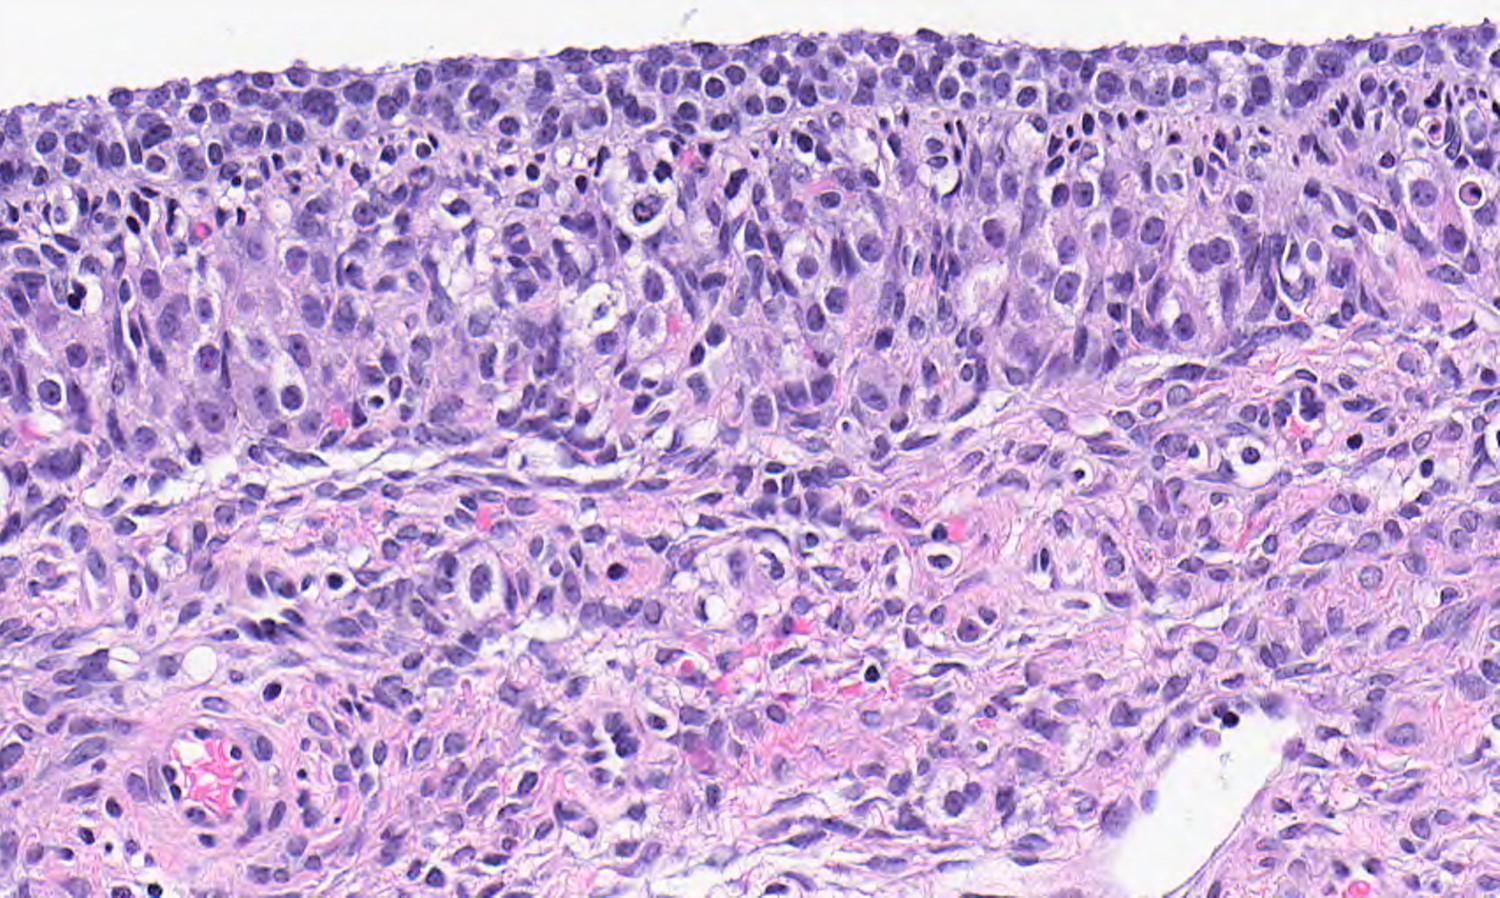 Luteinized theca cells